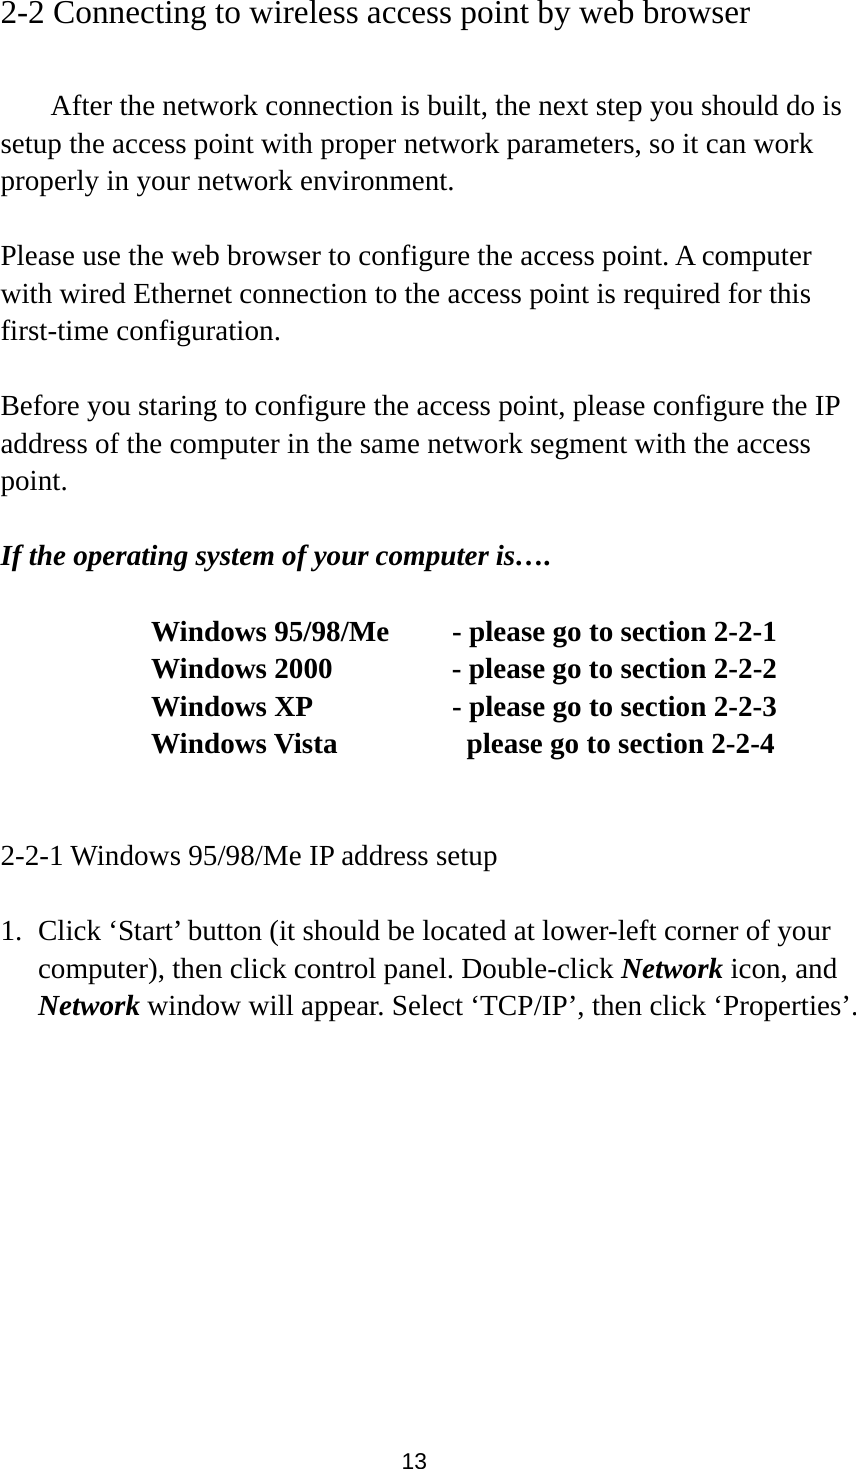 13 2-2 Connecting to wireless access point by web browser    After the network connection is built, the next step you should do is setup the access point with proper network parameters, so it can work properly in your network environment.  Please use the web browser to configure the access point. A computer with wired Ethernet connection to the access point is required for this first-time configuration.  Before you staring to configure the access point, please configure the IP address of the computer in the same network segment with the access point.  If the operating system of your computer is….     Windows 95/98/Me    - please go to section 2-2-1       Windows 2000           - please go to section 2-2-2         Windows XP      - please go to section 2-2-3       Windows Vista        please go to section 2-2-4   2-2-1 Windows 95/98/Me IP address setup  1. Click ‘Start’ button (it should be located at lower-left corner of your computer), then click control panel. Double-click Network icon, and Network window will appear. Select ‘TCP/IP’, then click ‘Properties’.  